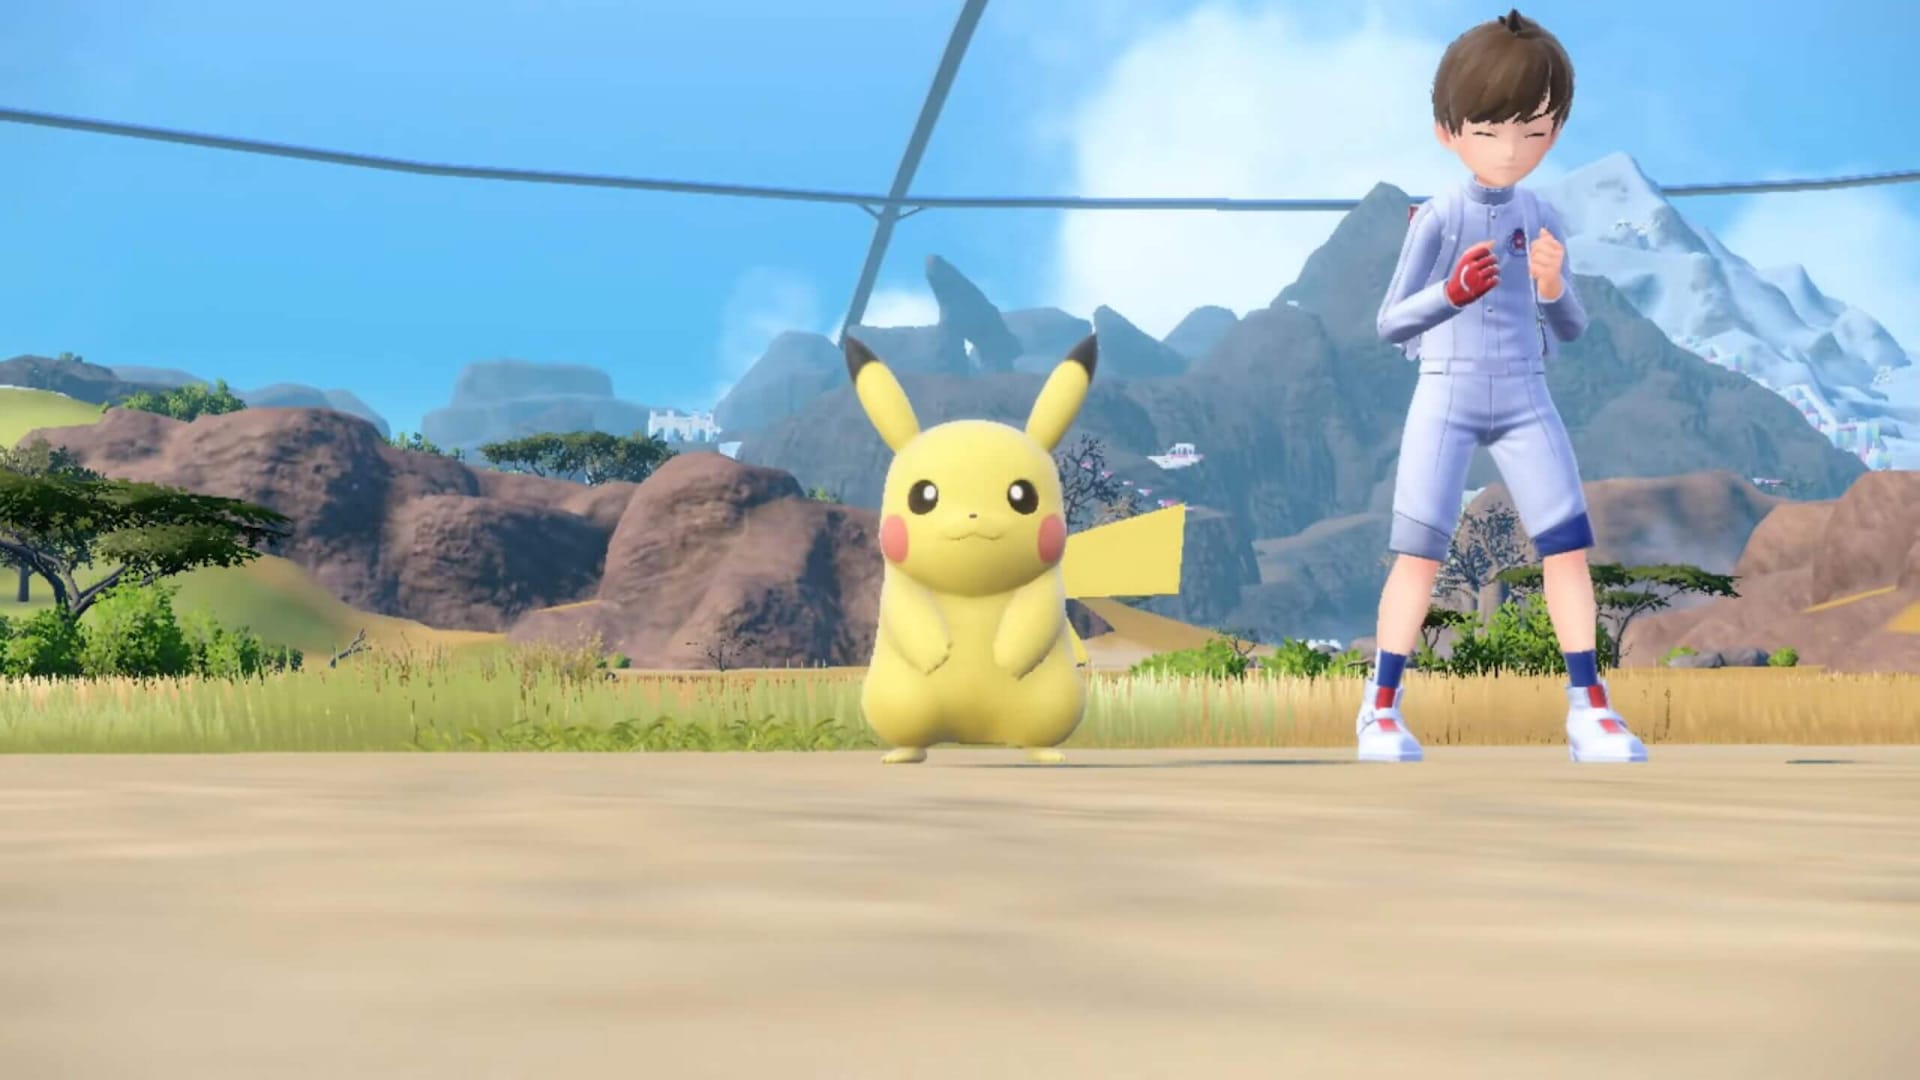 New Pokemon Scarlet and Violet DLC Trailer Shows Playable Pokemon and Tons of Legendaries